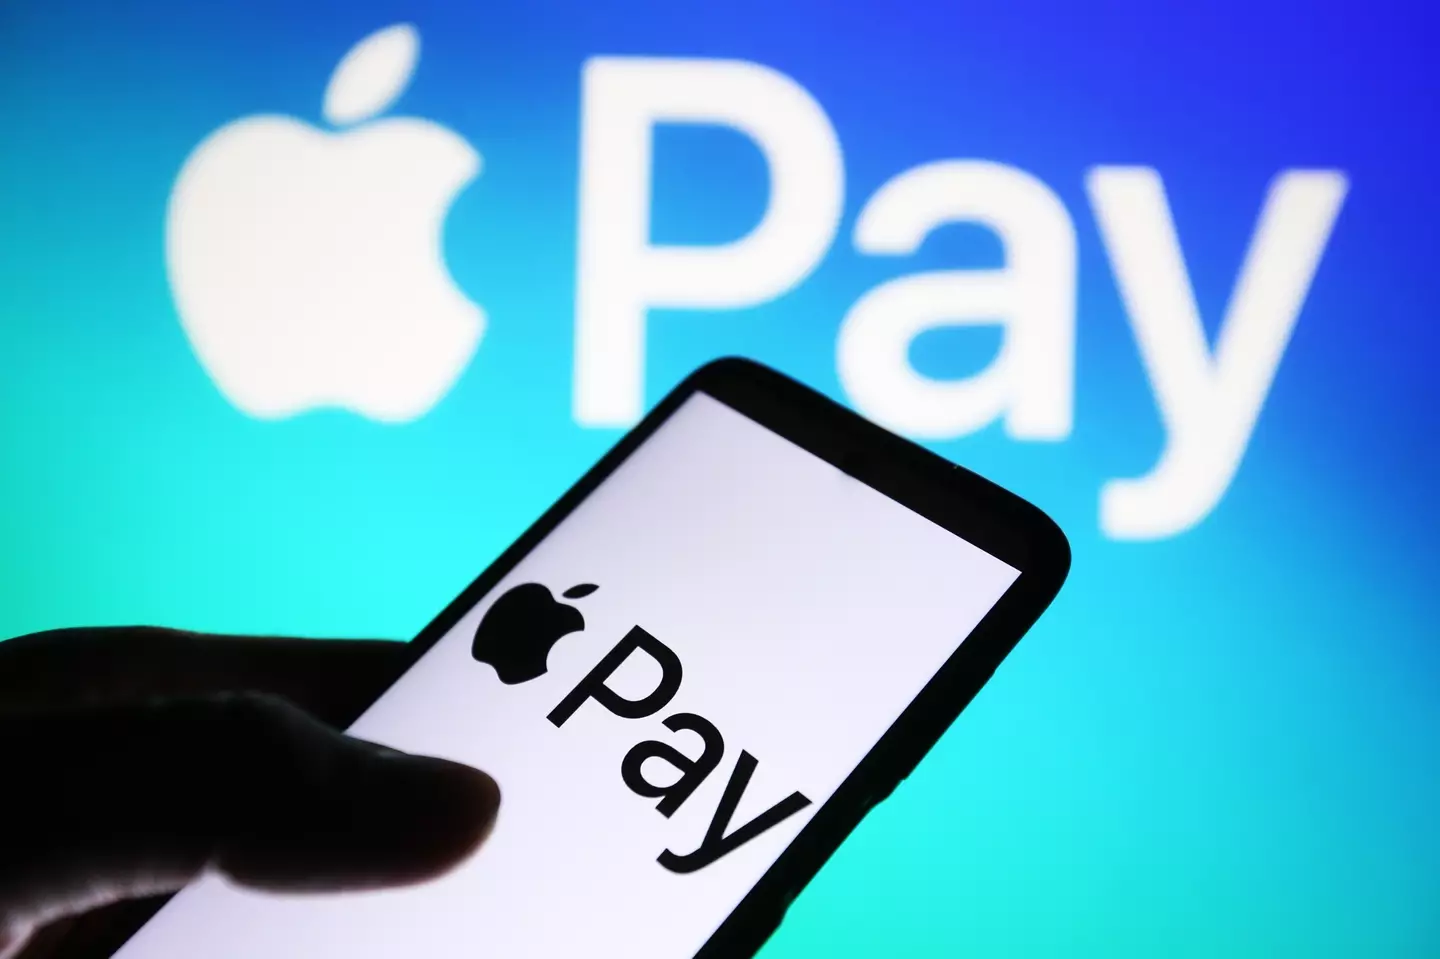 He urged Apple Pay users to be vigilant.